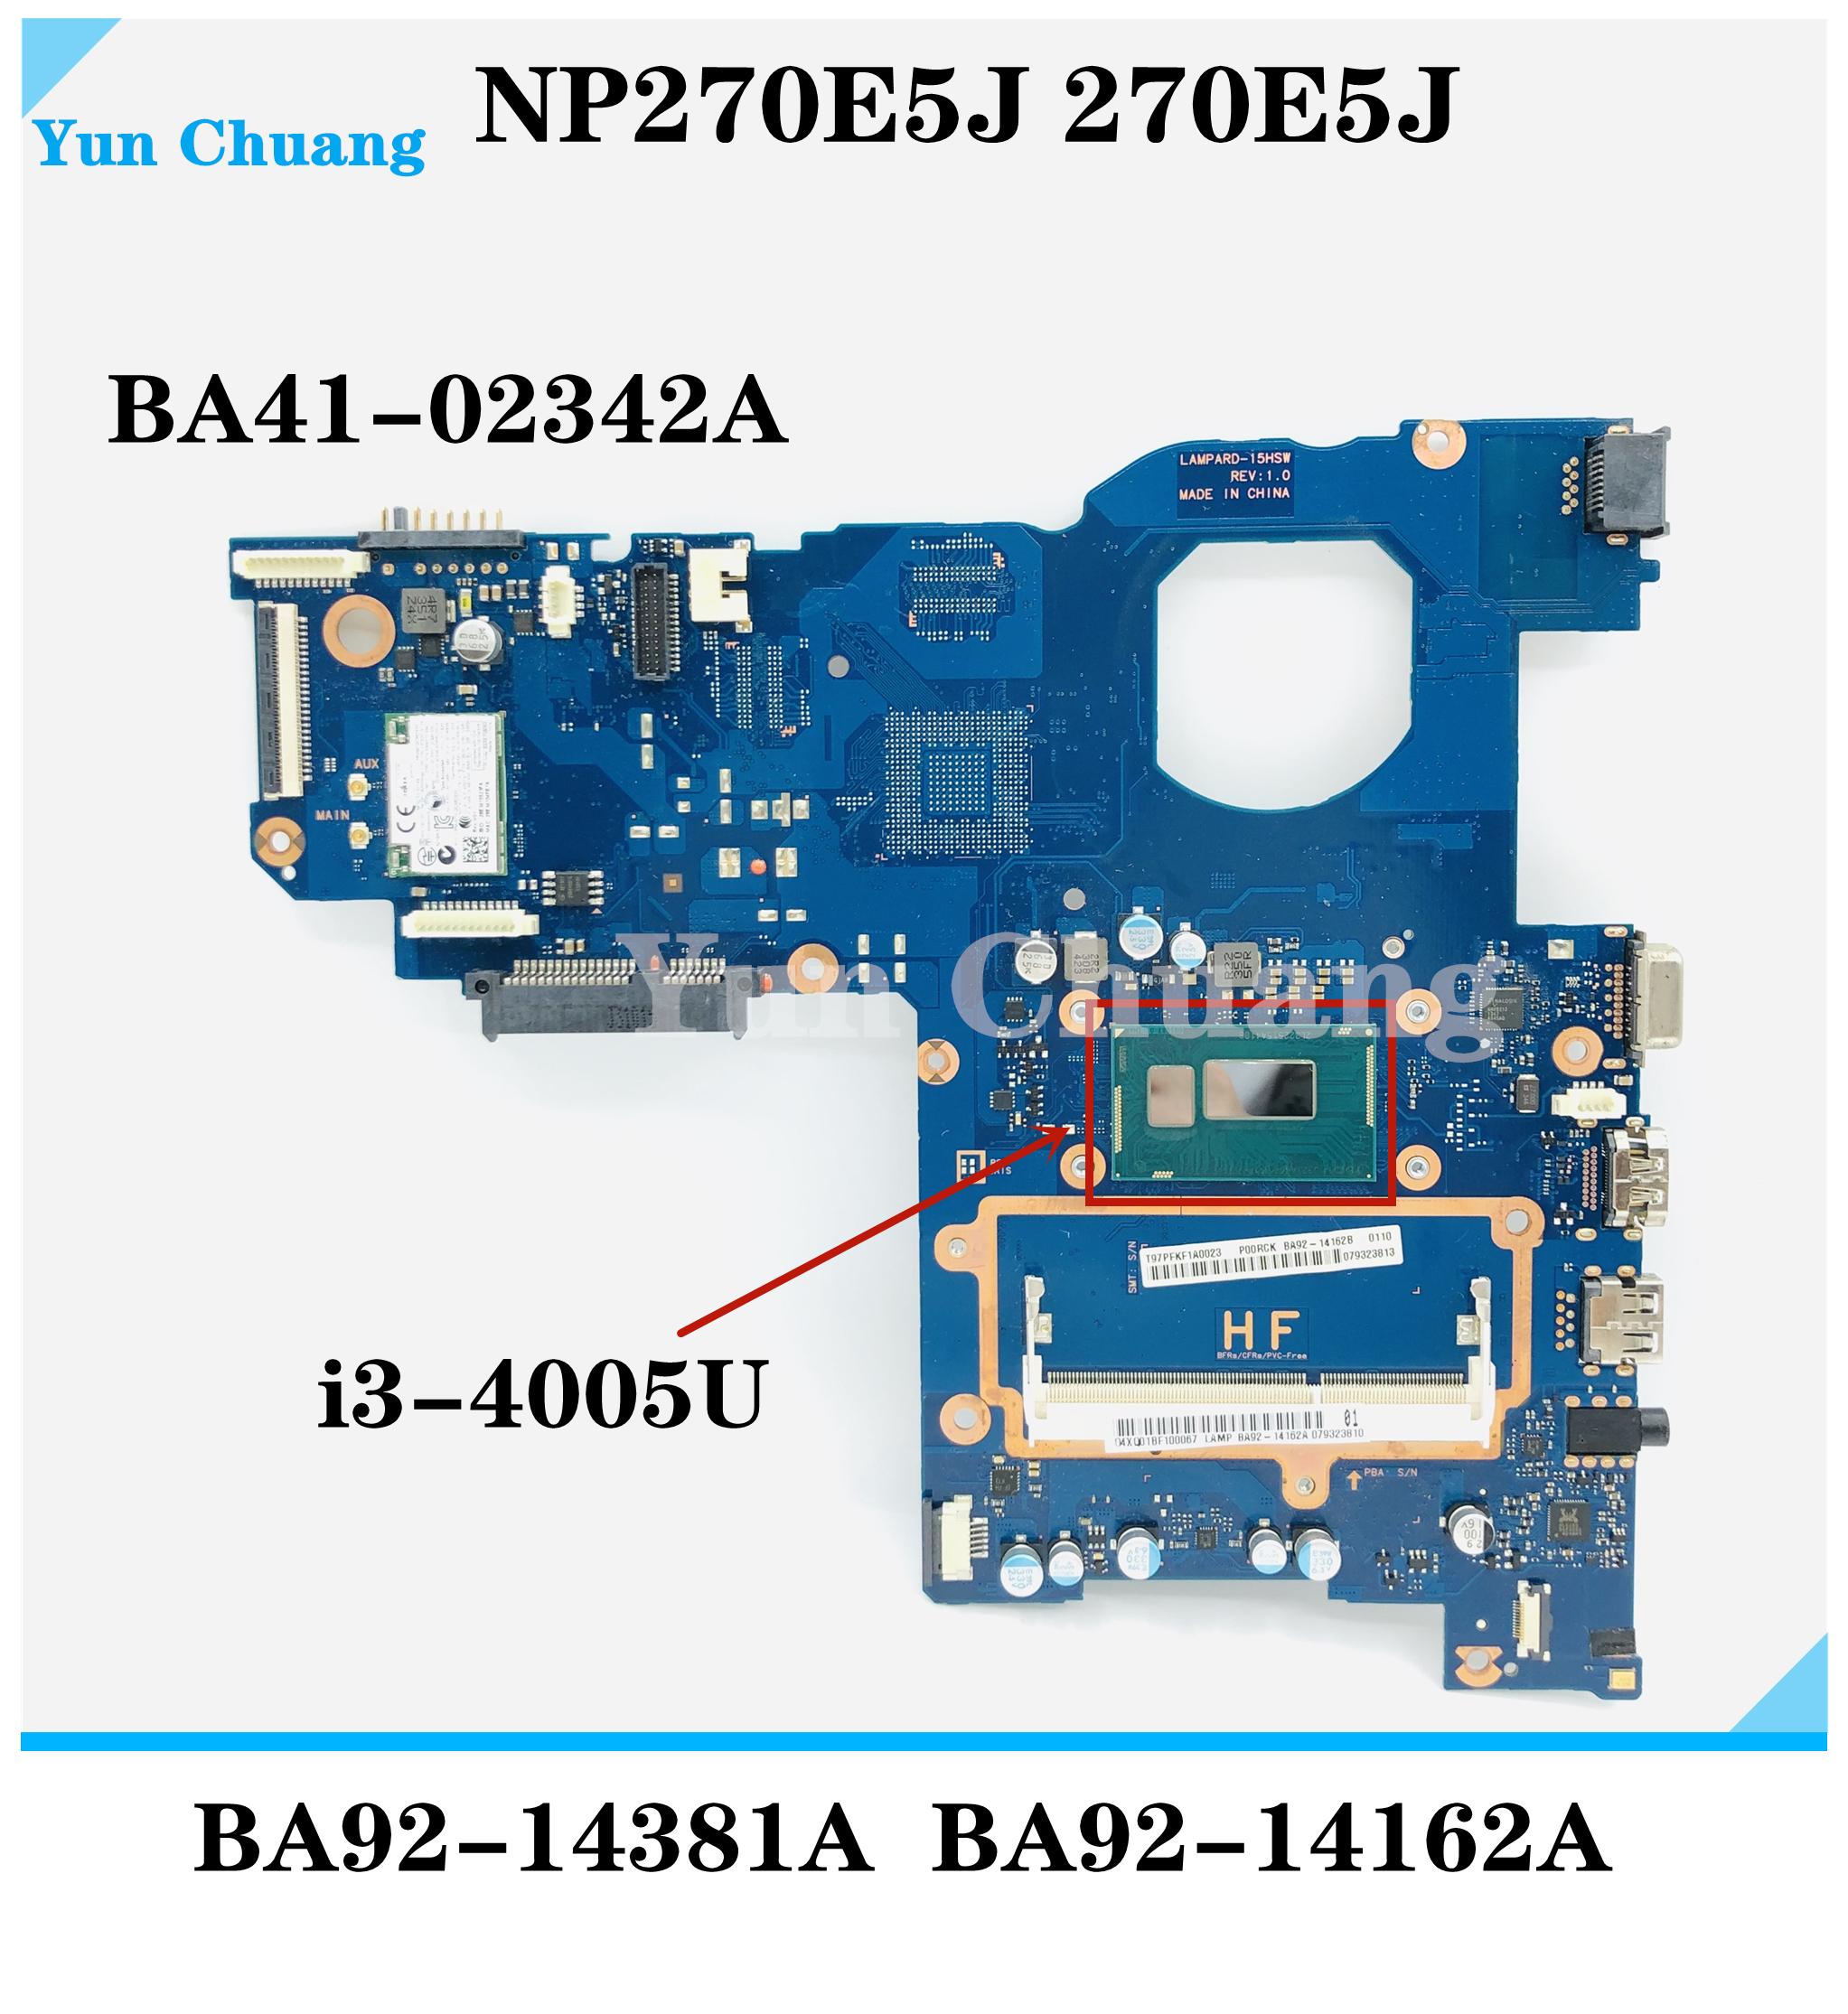 

Motherboards BA4102342A BA9214162A BA9214381A for Samsung NP270E5J 270E5J notebook motherboard With CPU i34005U DDR3L 100% test work